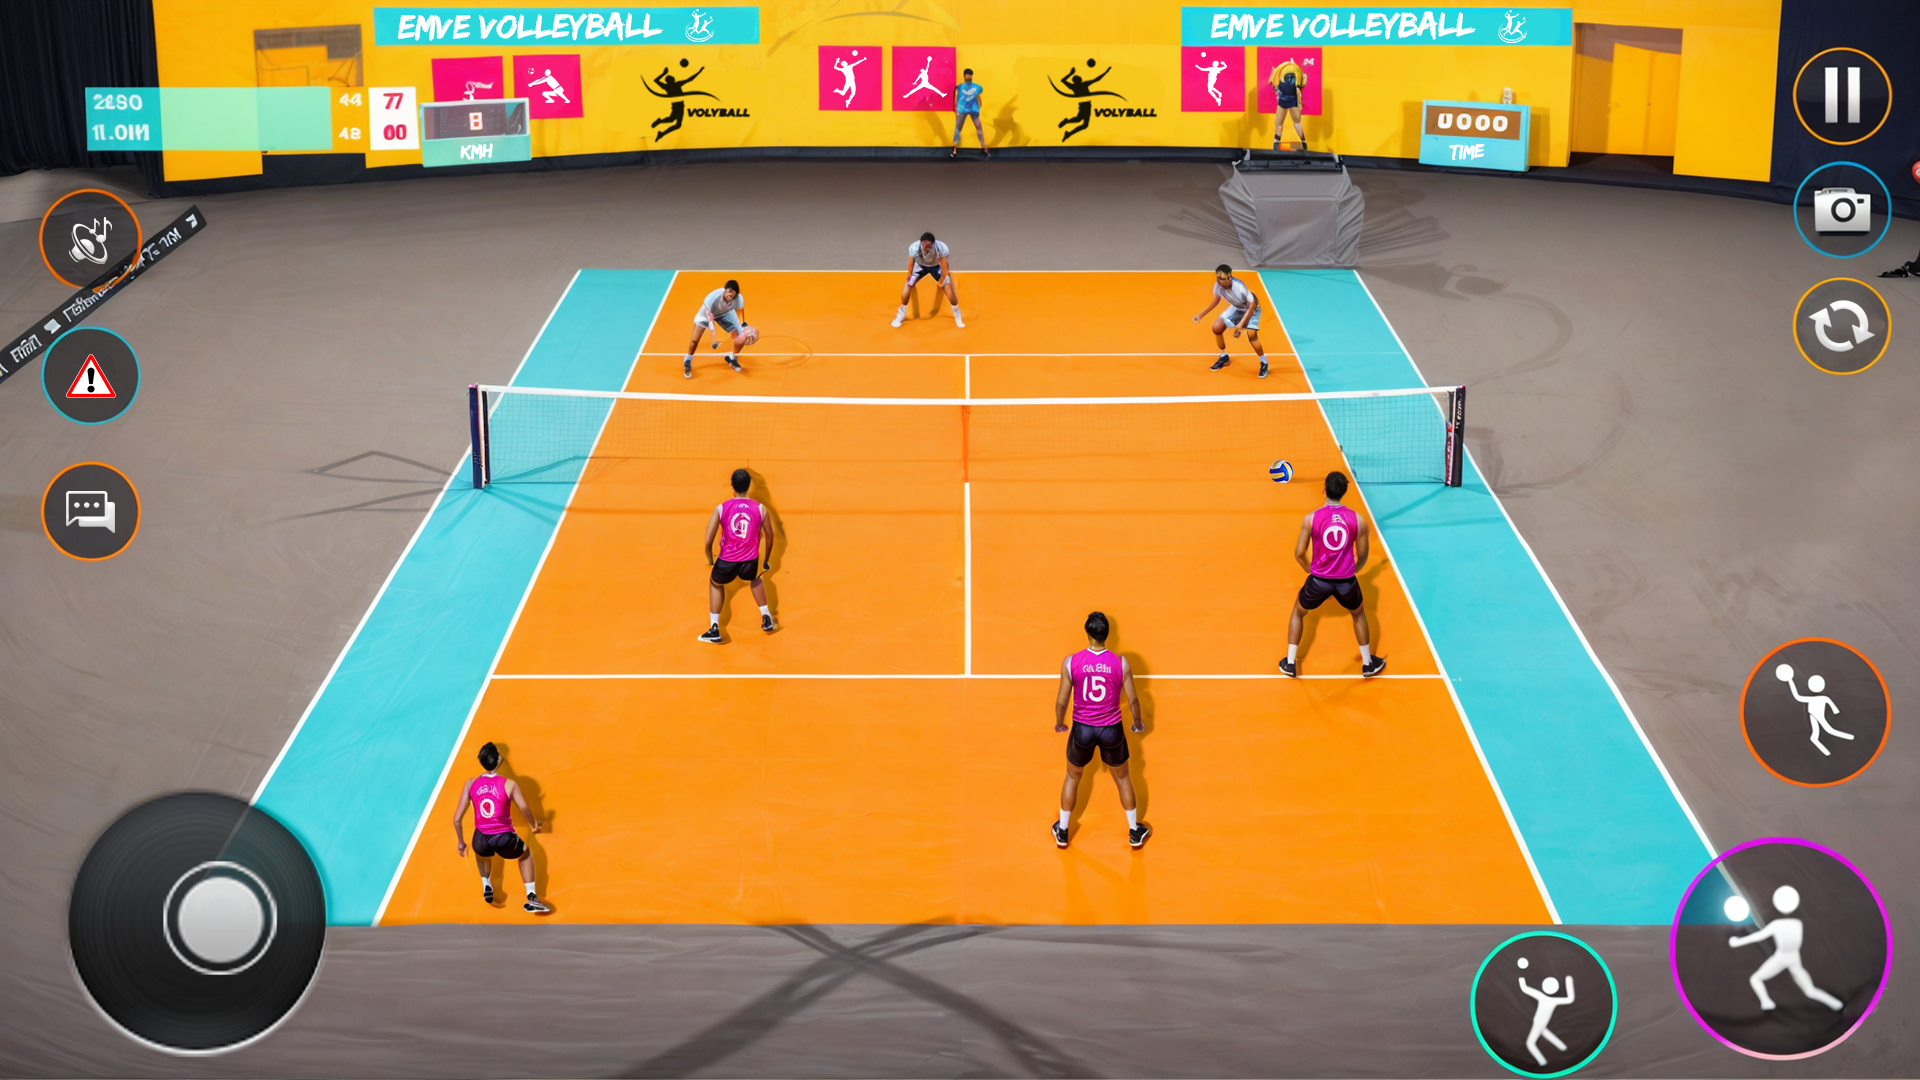 Volleyball Games Arena screenshot game